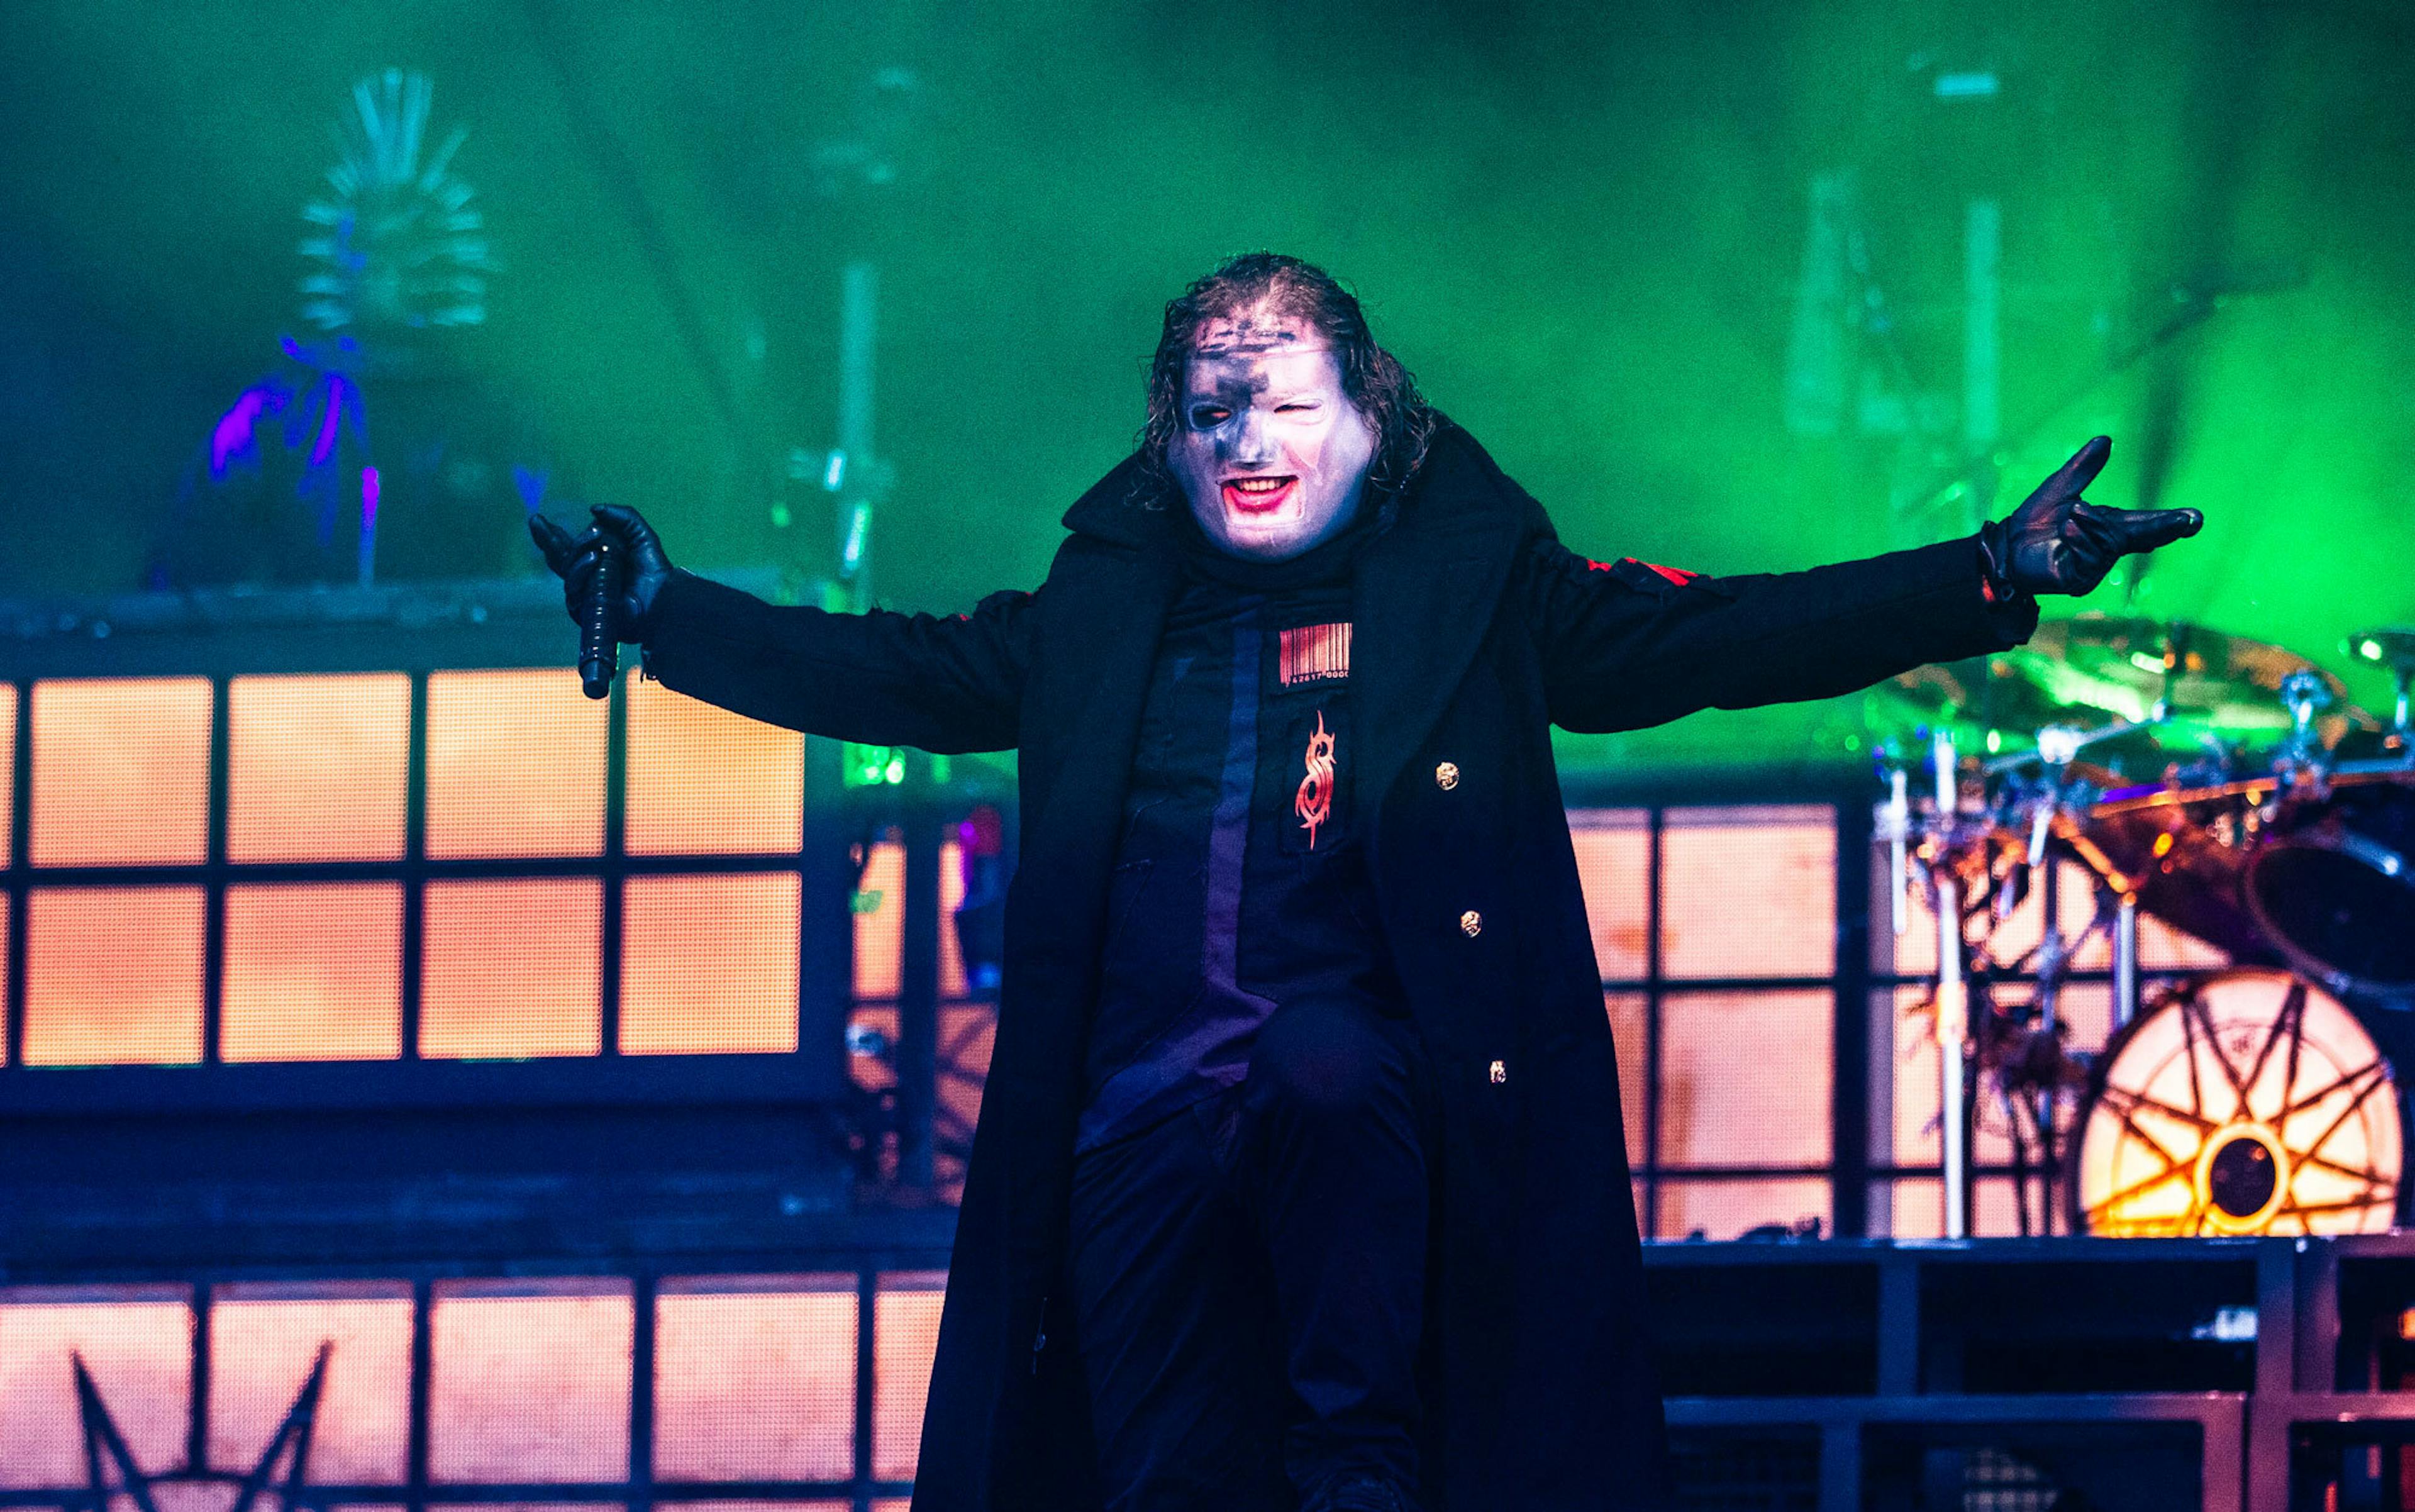 Watch Corey Taylor Stop A Slipknot Show When The Mosh-Pit Gets Too Dangerous